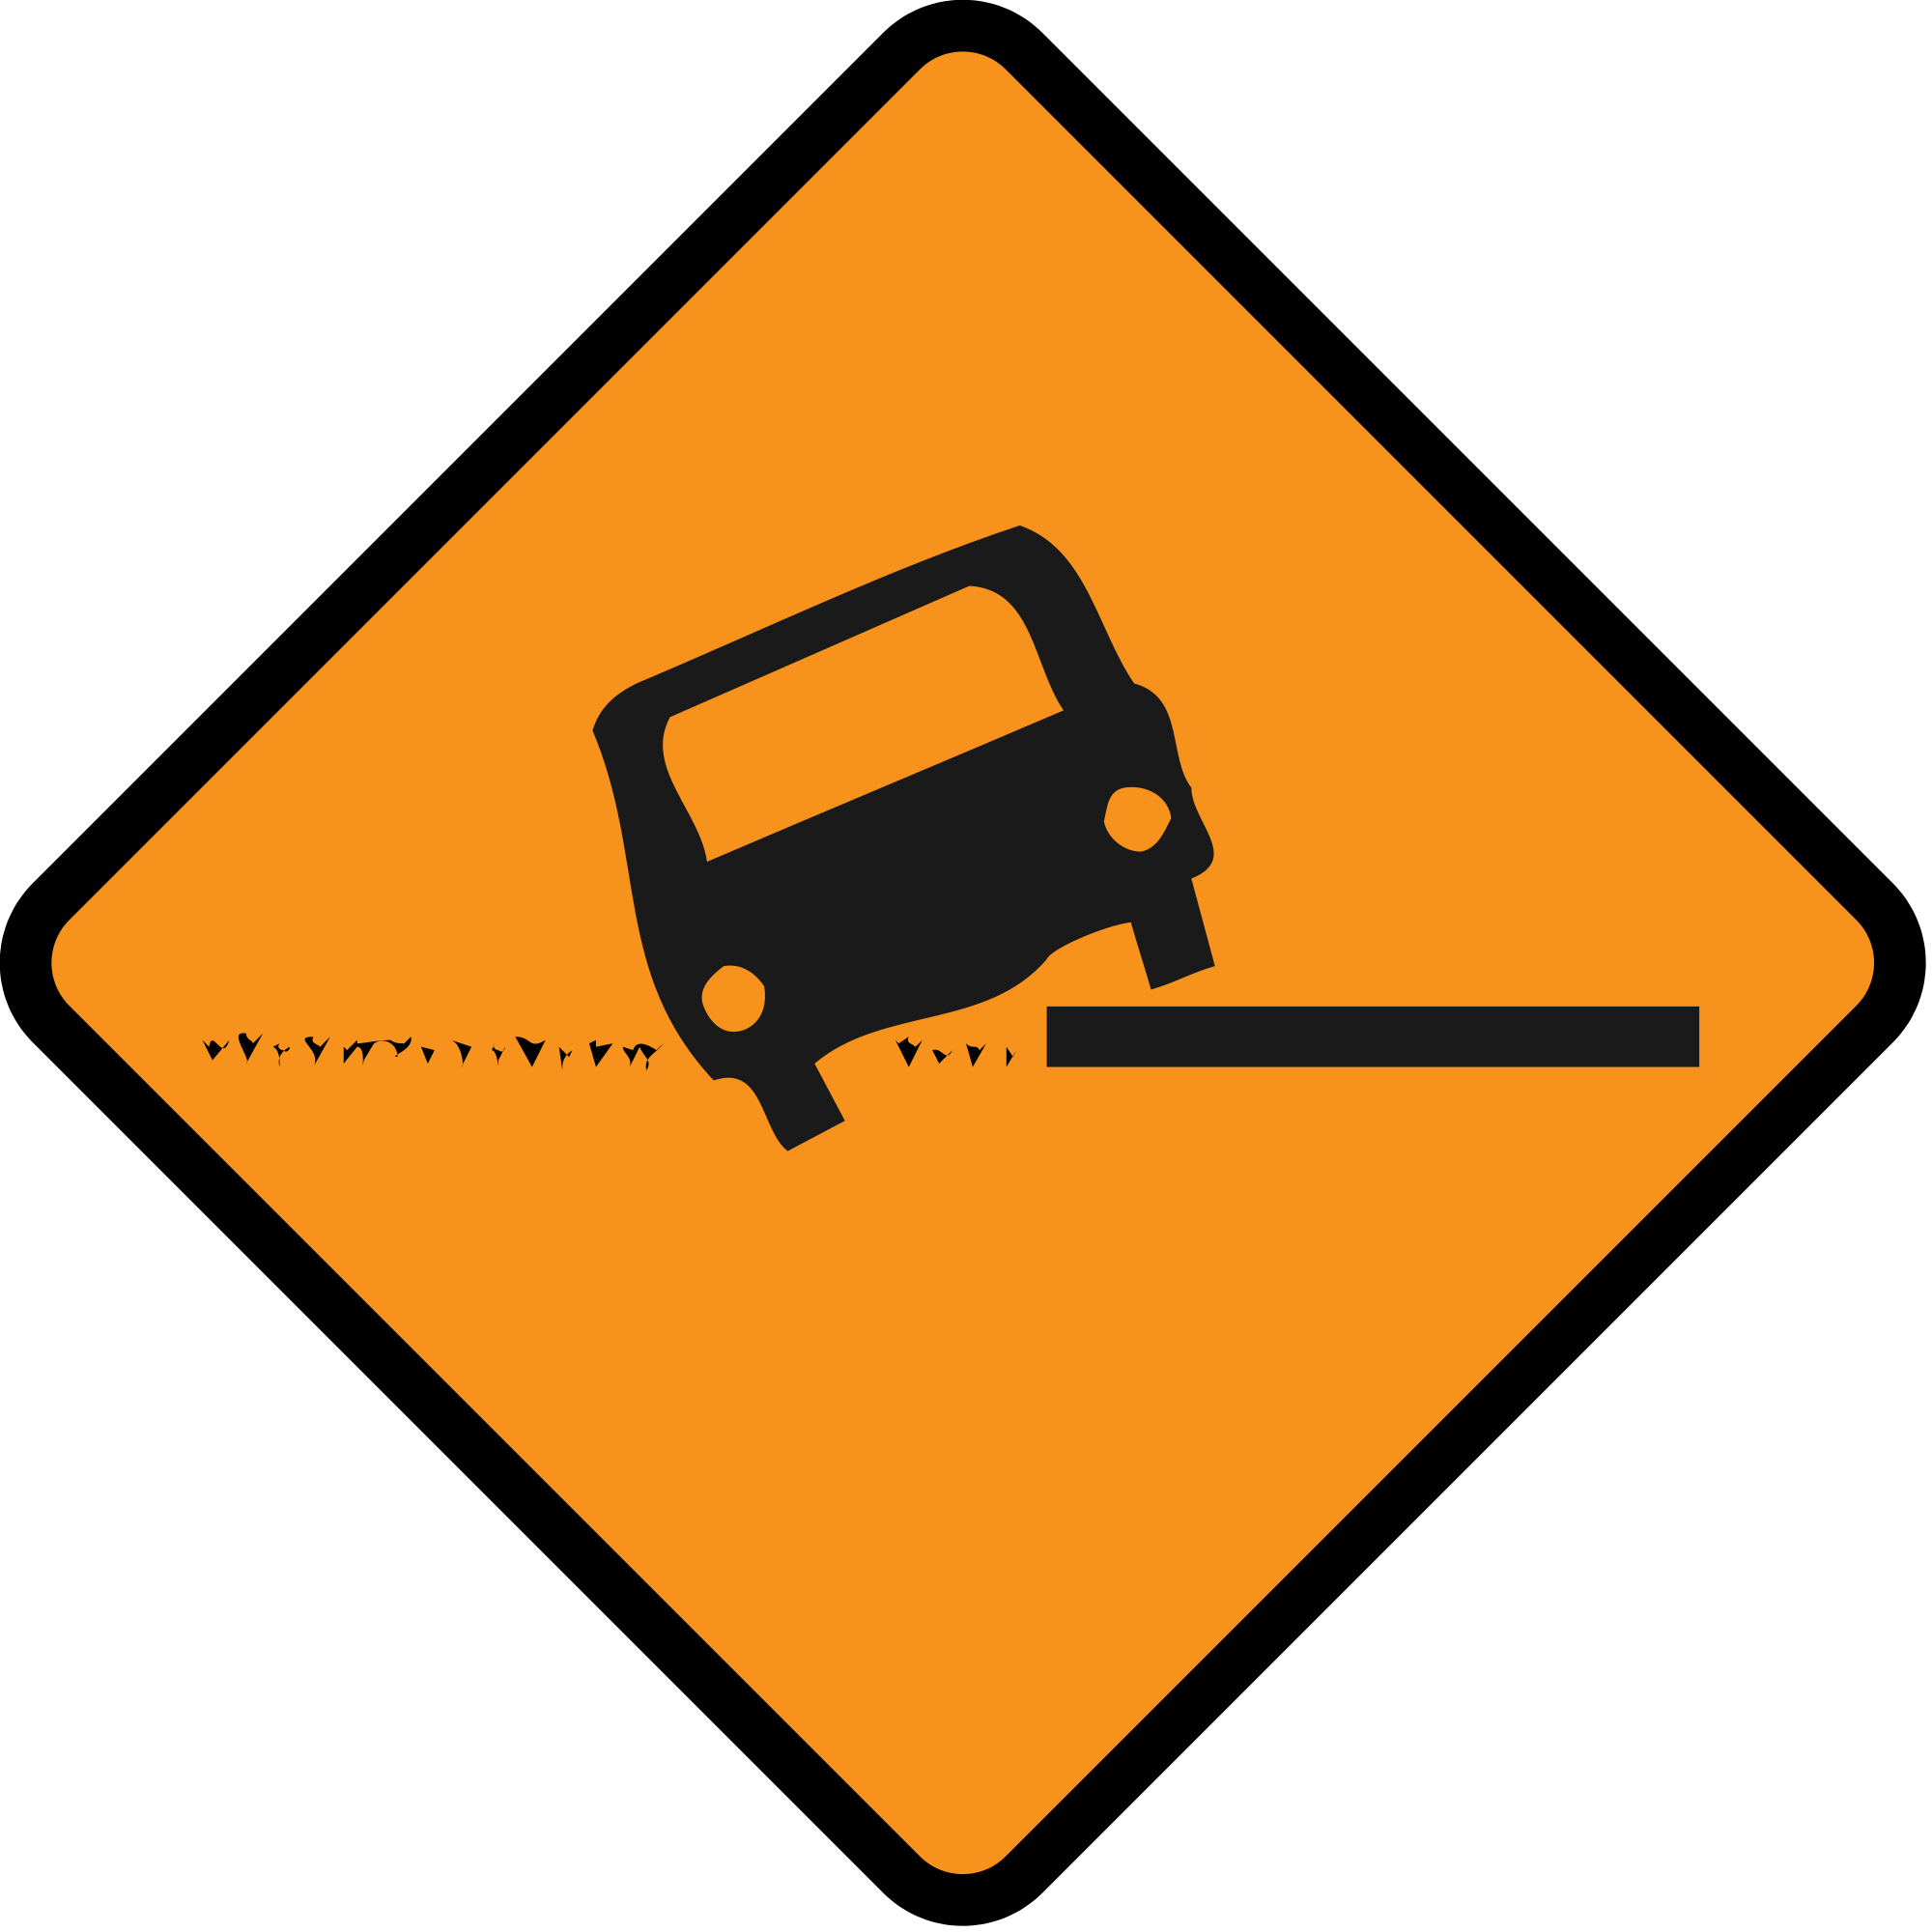 File:Diamond road sign uneven surface.svg - Wikimedia Commons